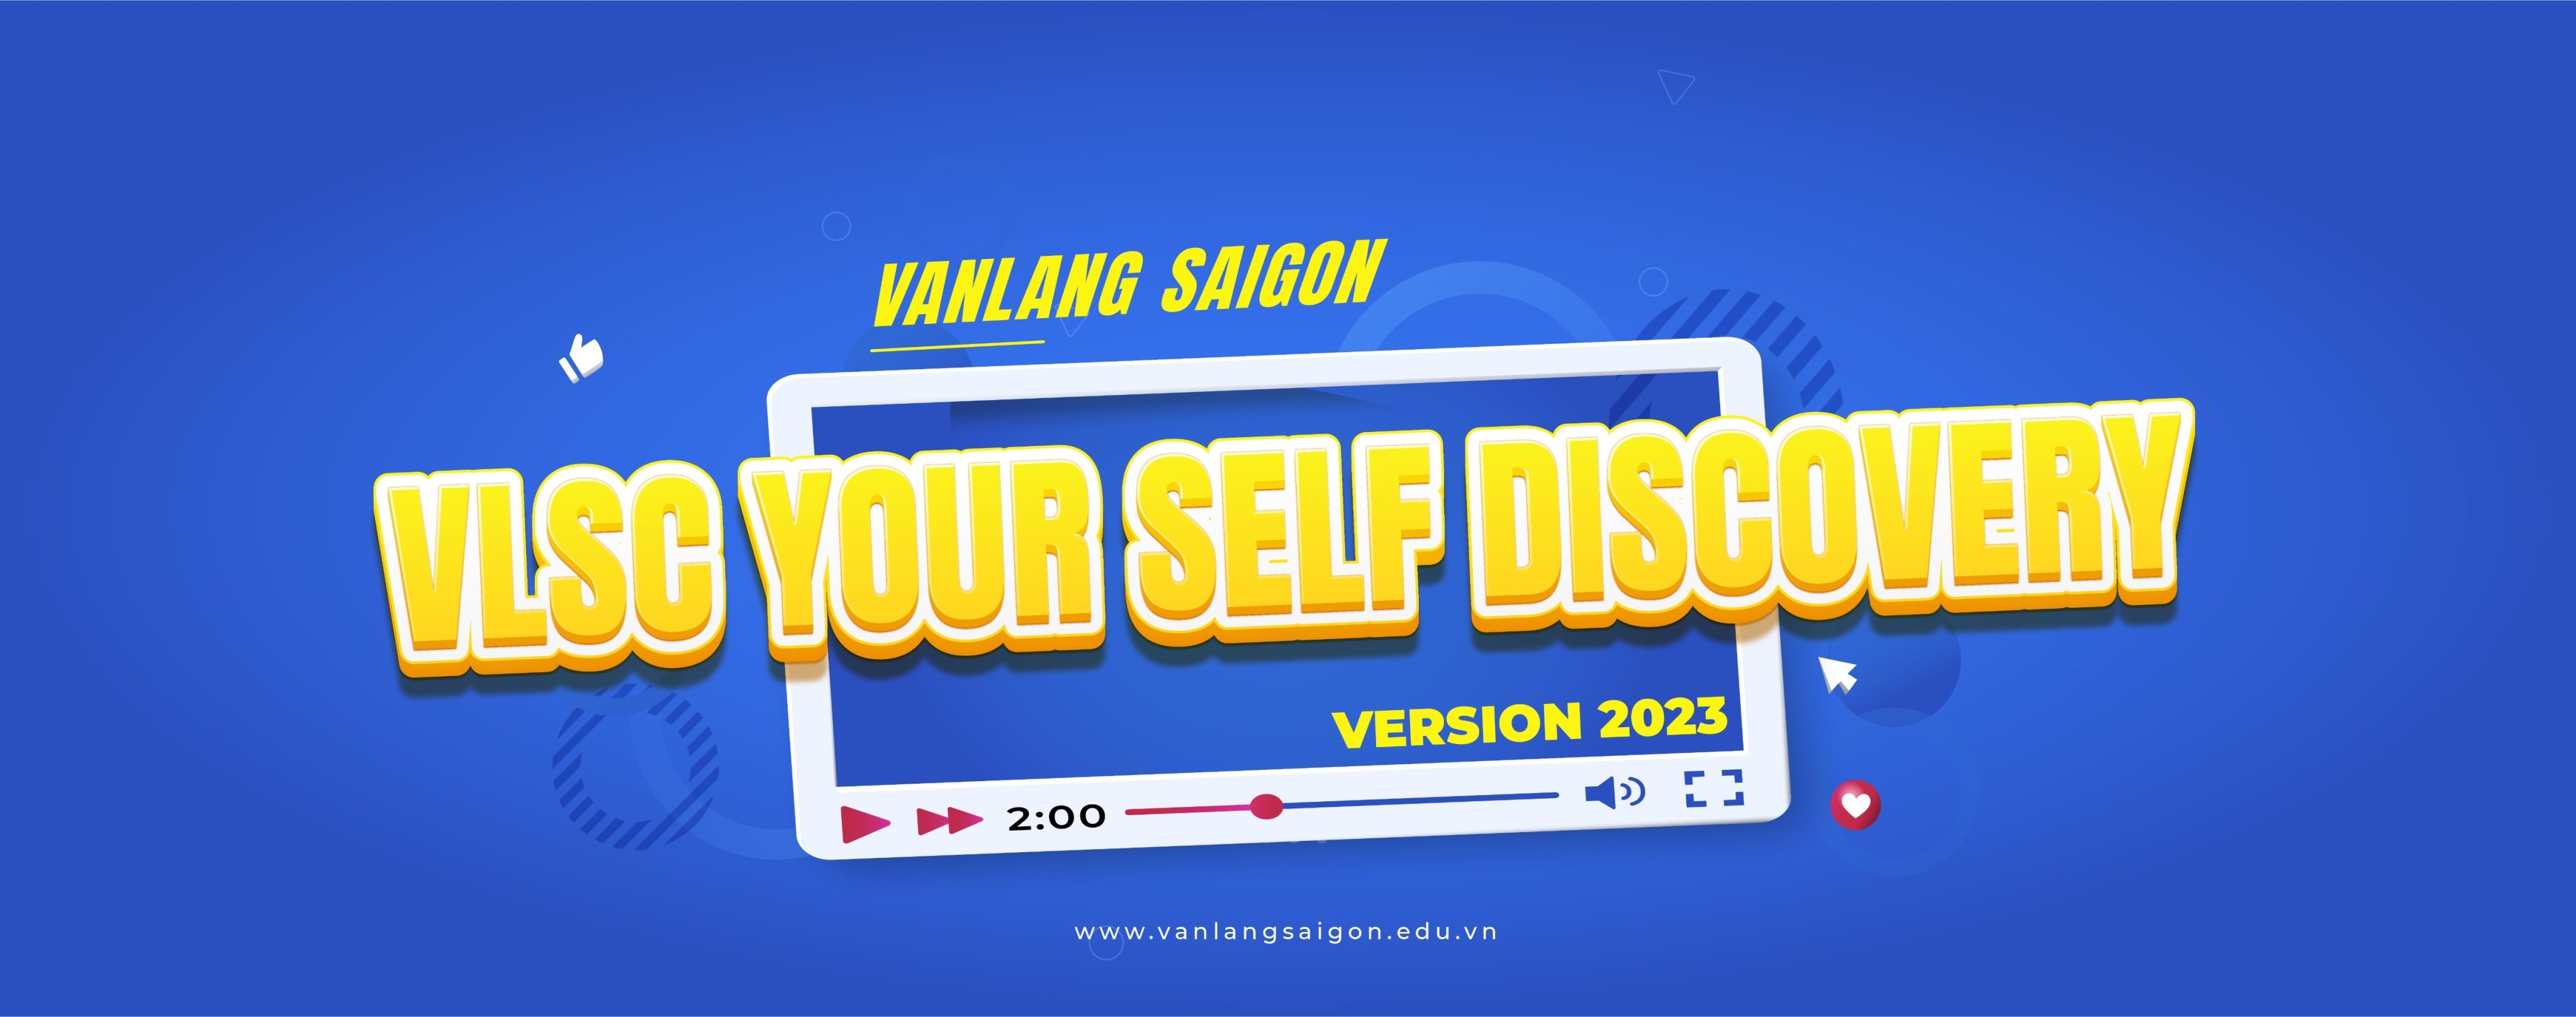 VLSC YOUR SELF - DISCOVERY SỐ 2